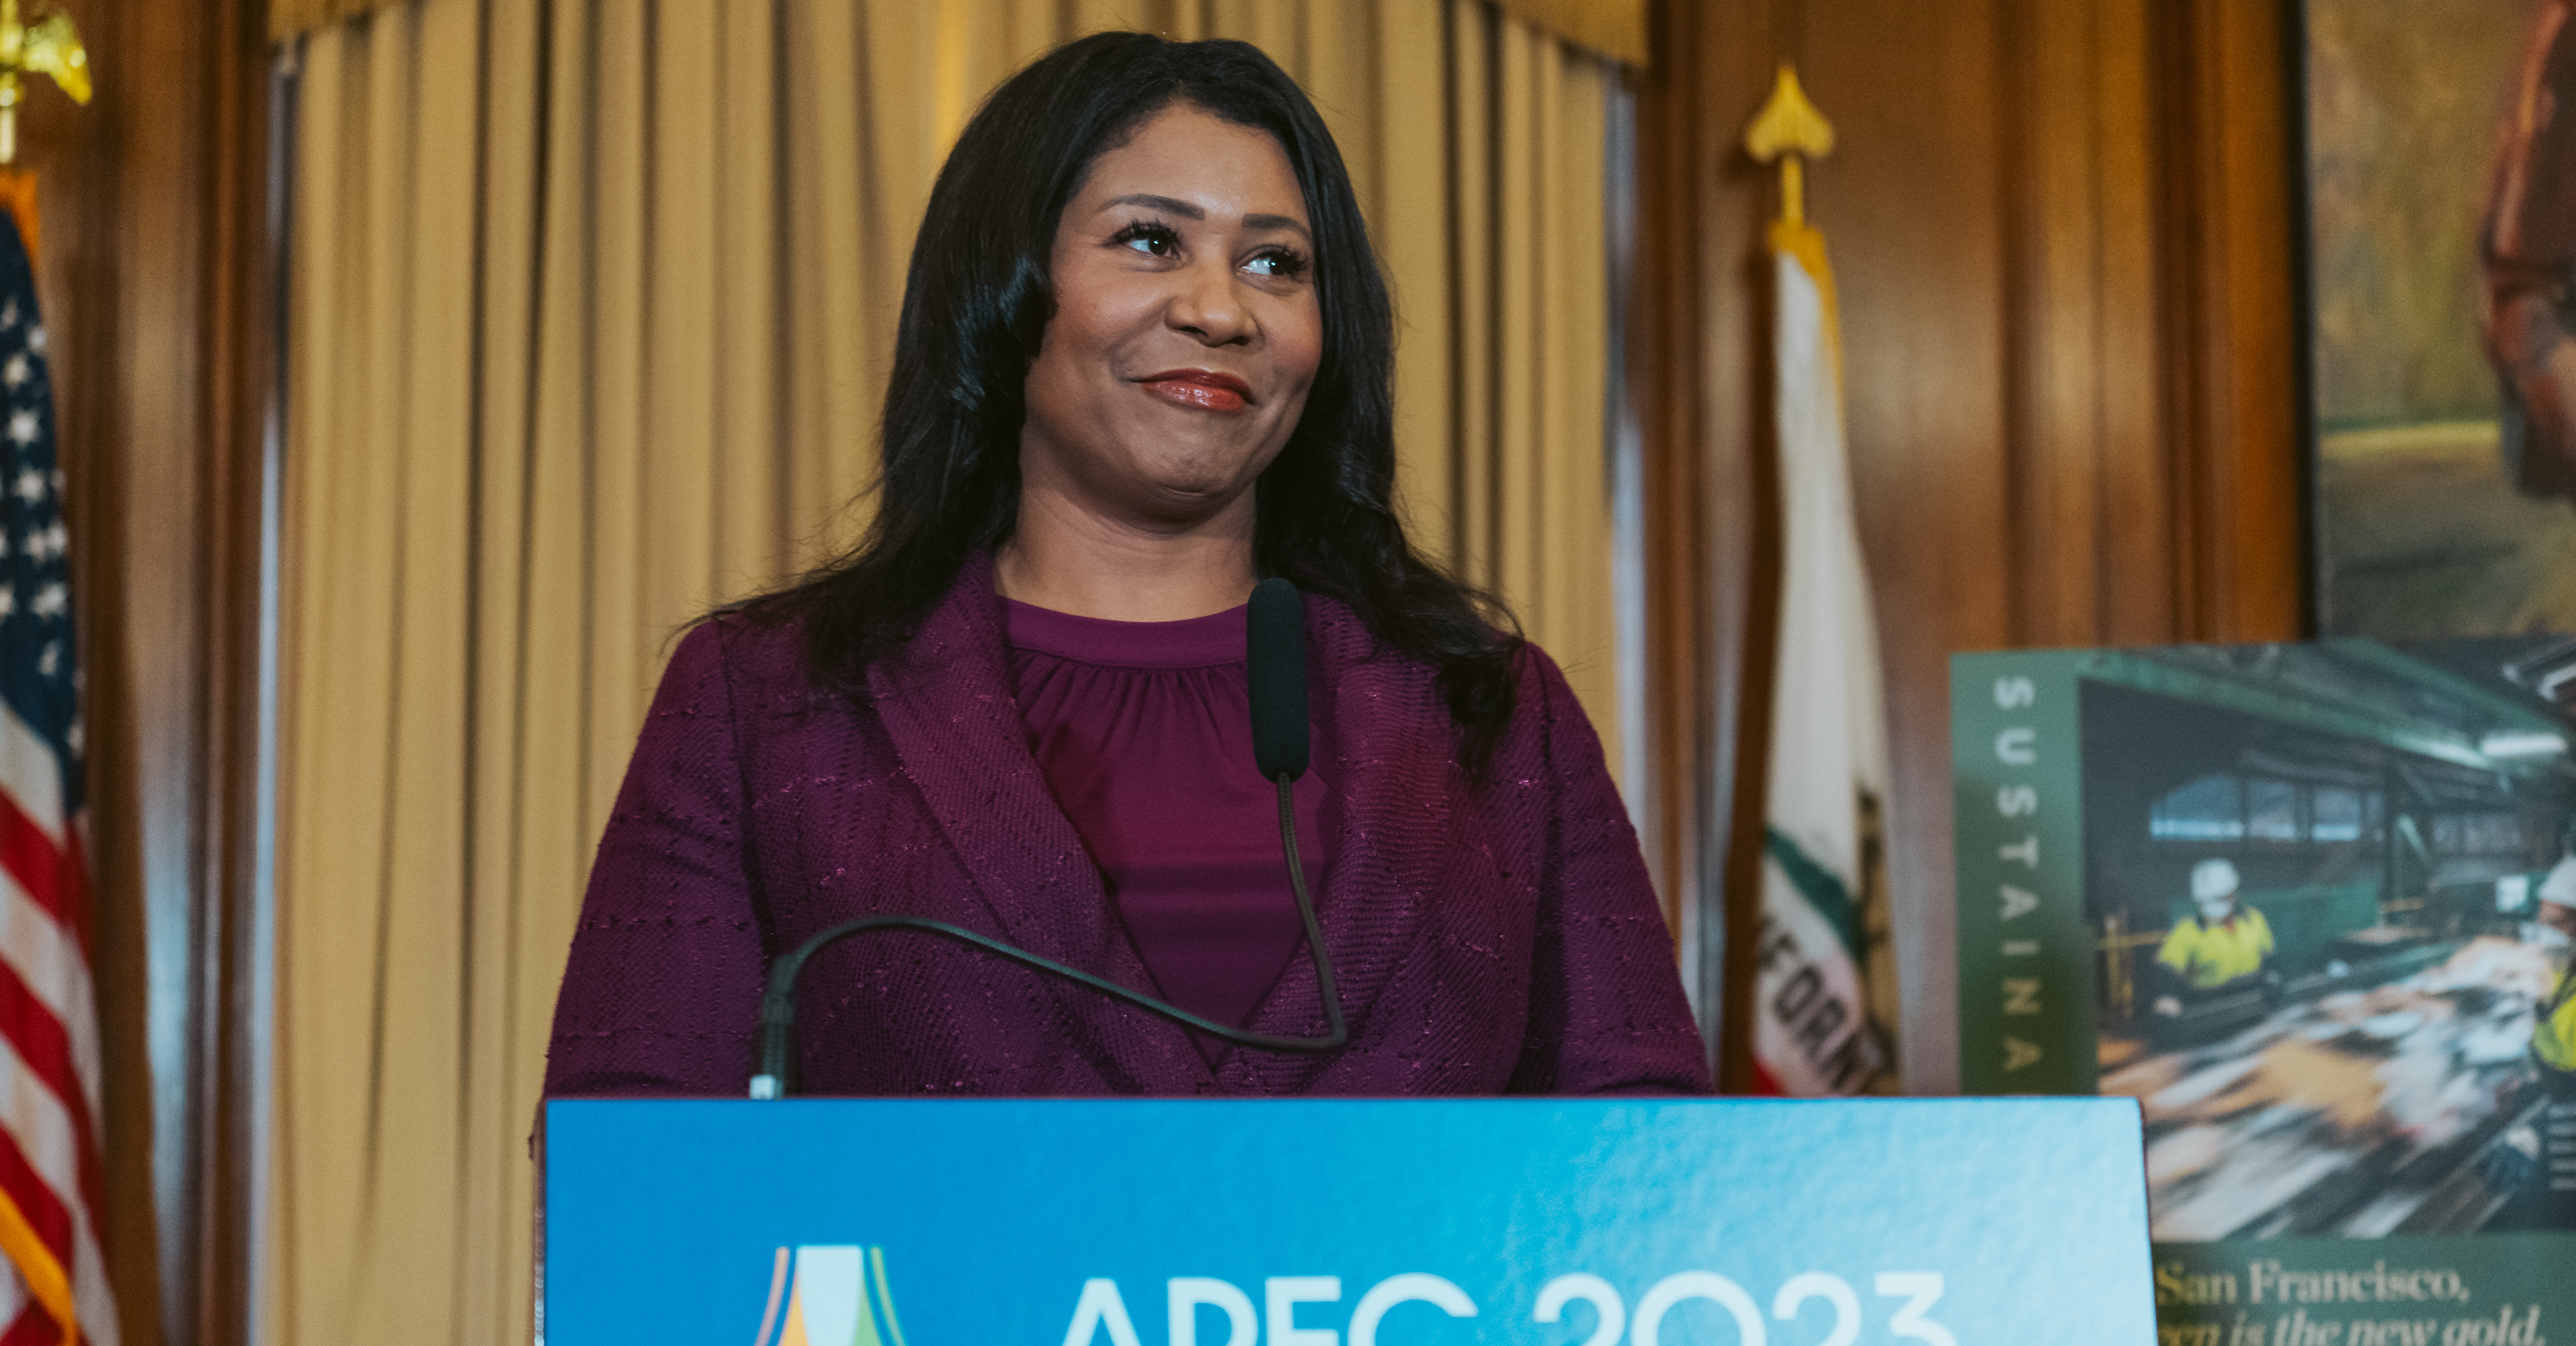 San Francisco Mayor London Breed, dressed in a purple speaks to the media during a press conference in City Hall. She stands behind a podium that reads "APEC 2023 UNITED STATES" in a wood paneled room.